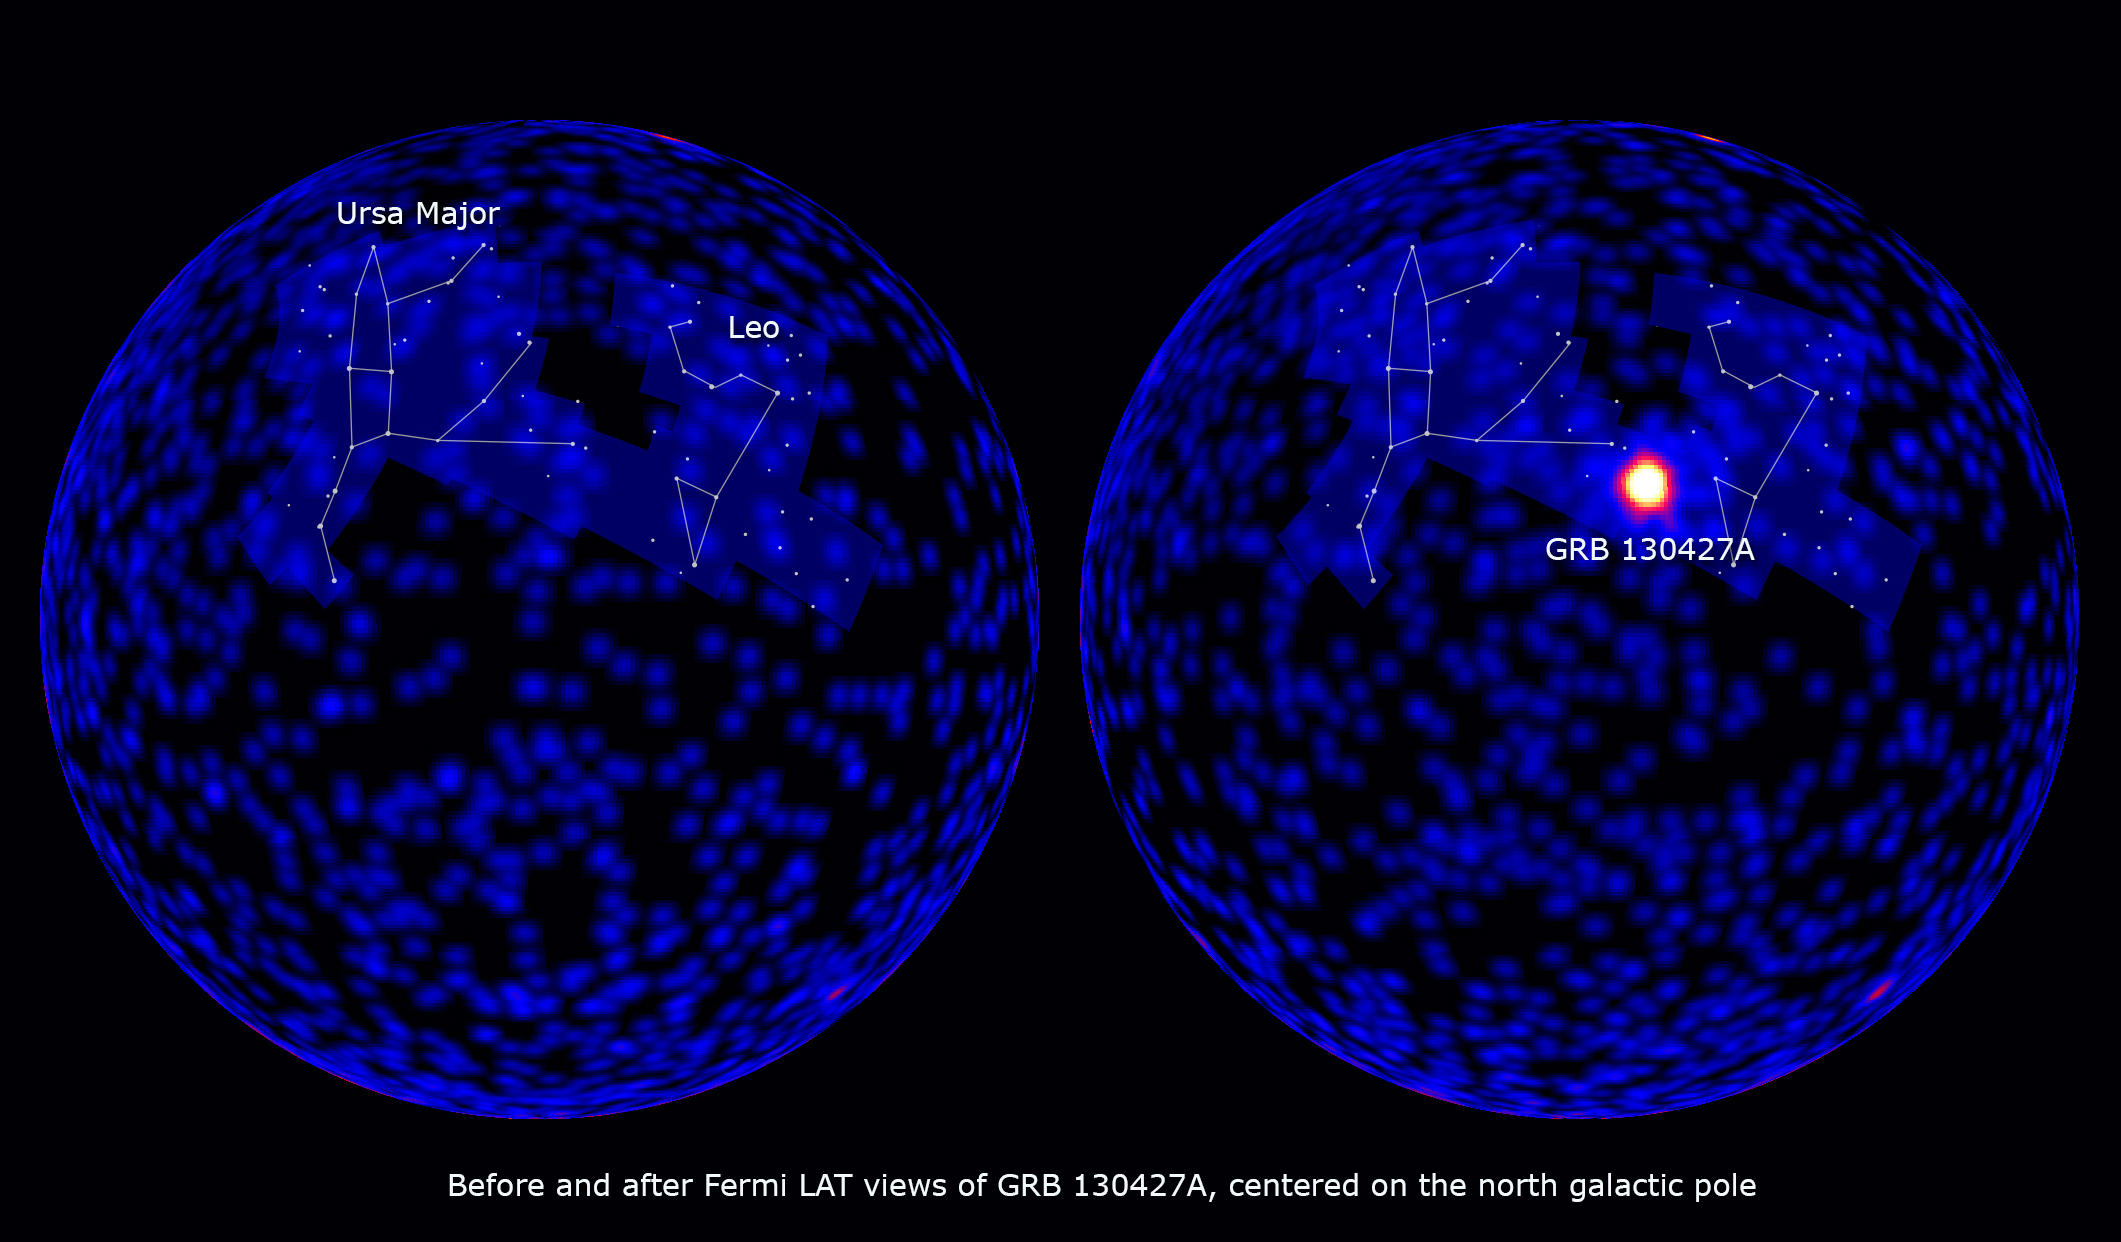 The maps in this animation show how the sky looks at gamma-ray energies above 100 million electron volts (MeV) with a view centered on the north galactic pole. The first frame shows the sky during a three-hour interval prior to GRB 130427A. The second frame shows a three-hour interval starting 2.5 hours before the burst, and ending 30 minutes into the event. The Fermi team chose this interval to demonstrate how bright the burst was relative to the rest of the gamma-ray sky. This burst was bright enough that Fermi autonomously left its normal surveying mode to give the LAT instrument a better view, so the three-hour exposure following the burst does not cover the whole sky in the usual way. Image Credit: NASA/DOE/Fermi LAT Collaboration 